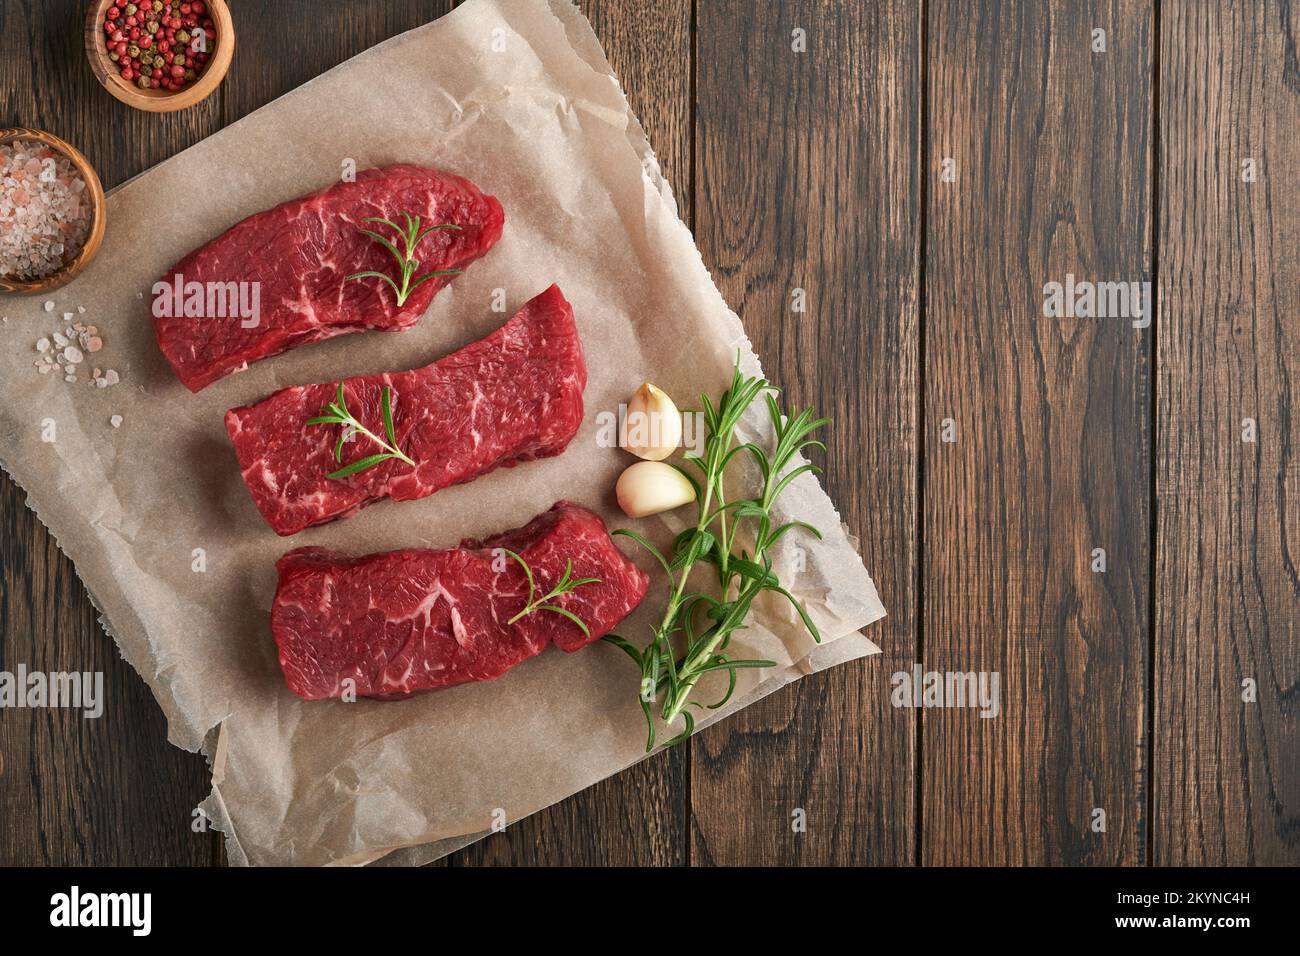 Raw steaks. Top blade steaks on wood burning board with spices, rosemary, vegetables and ingredients for cooking on old wooden background. Top view. C Stock Photo